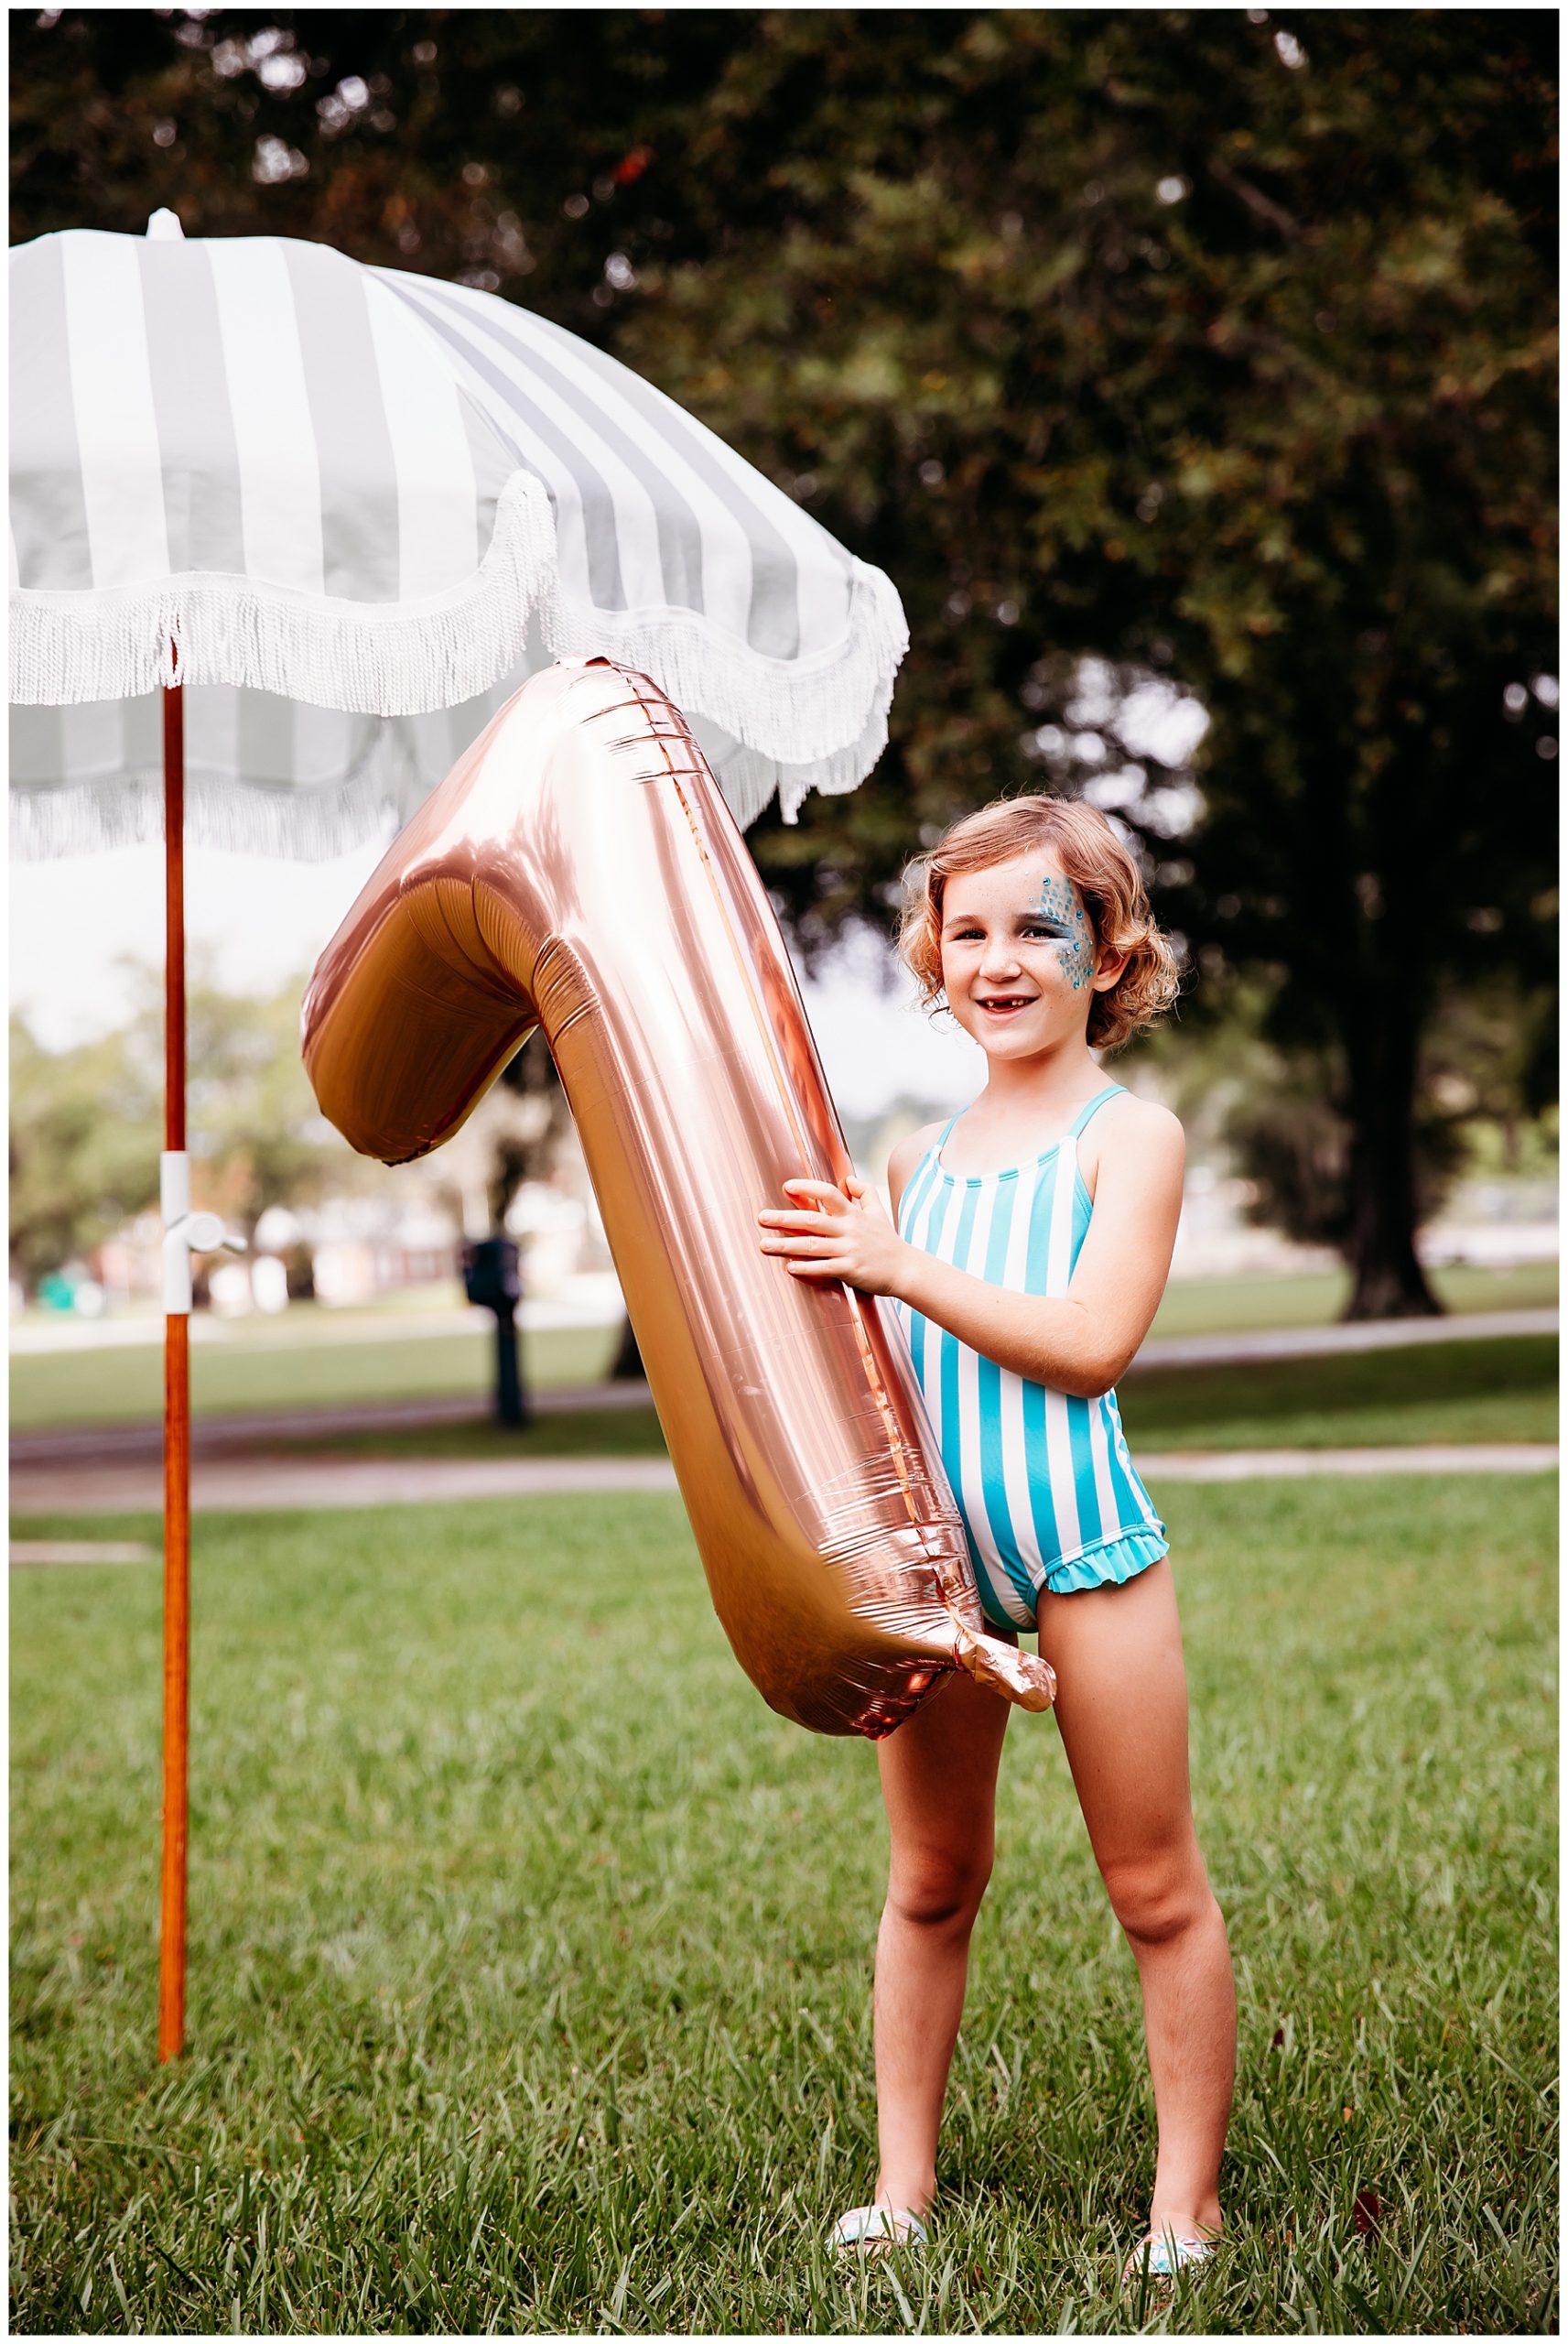 Girl holding a 7 balloon at her birthday party